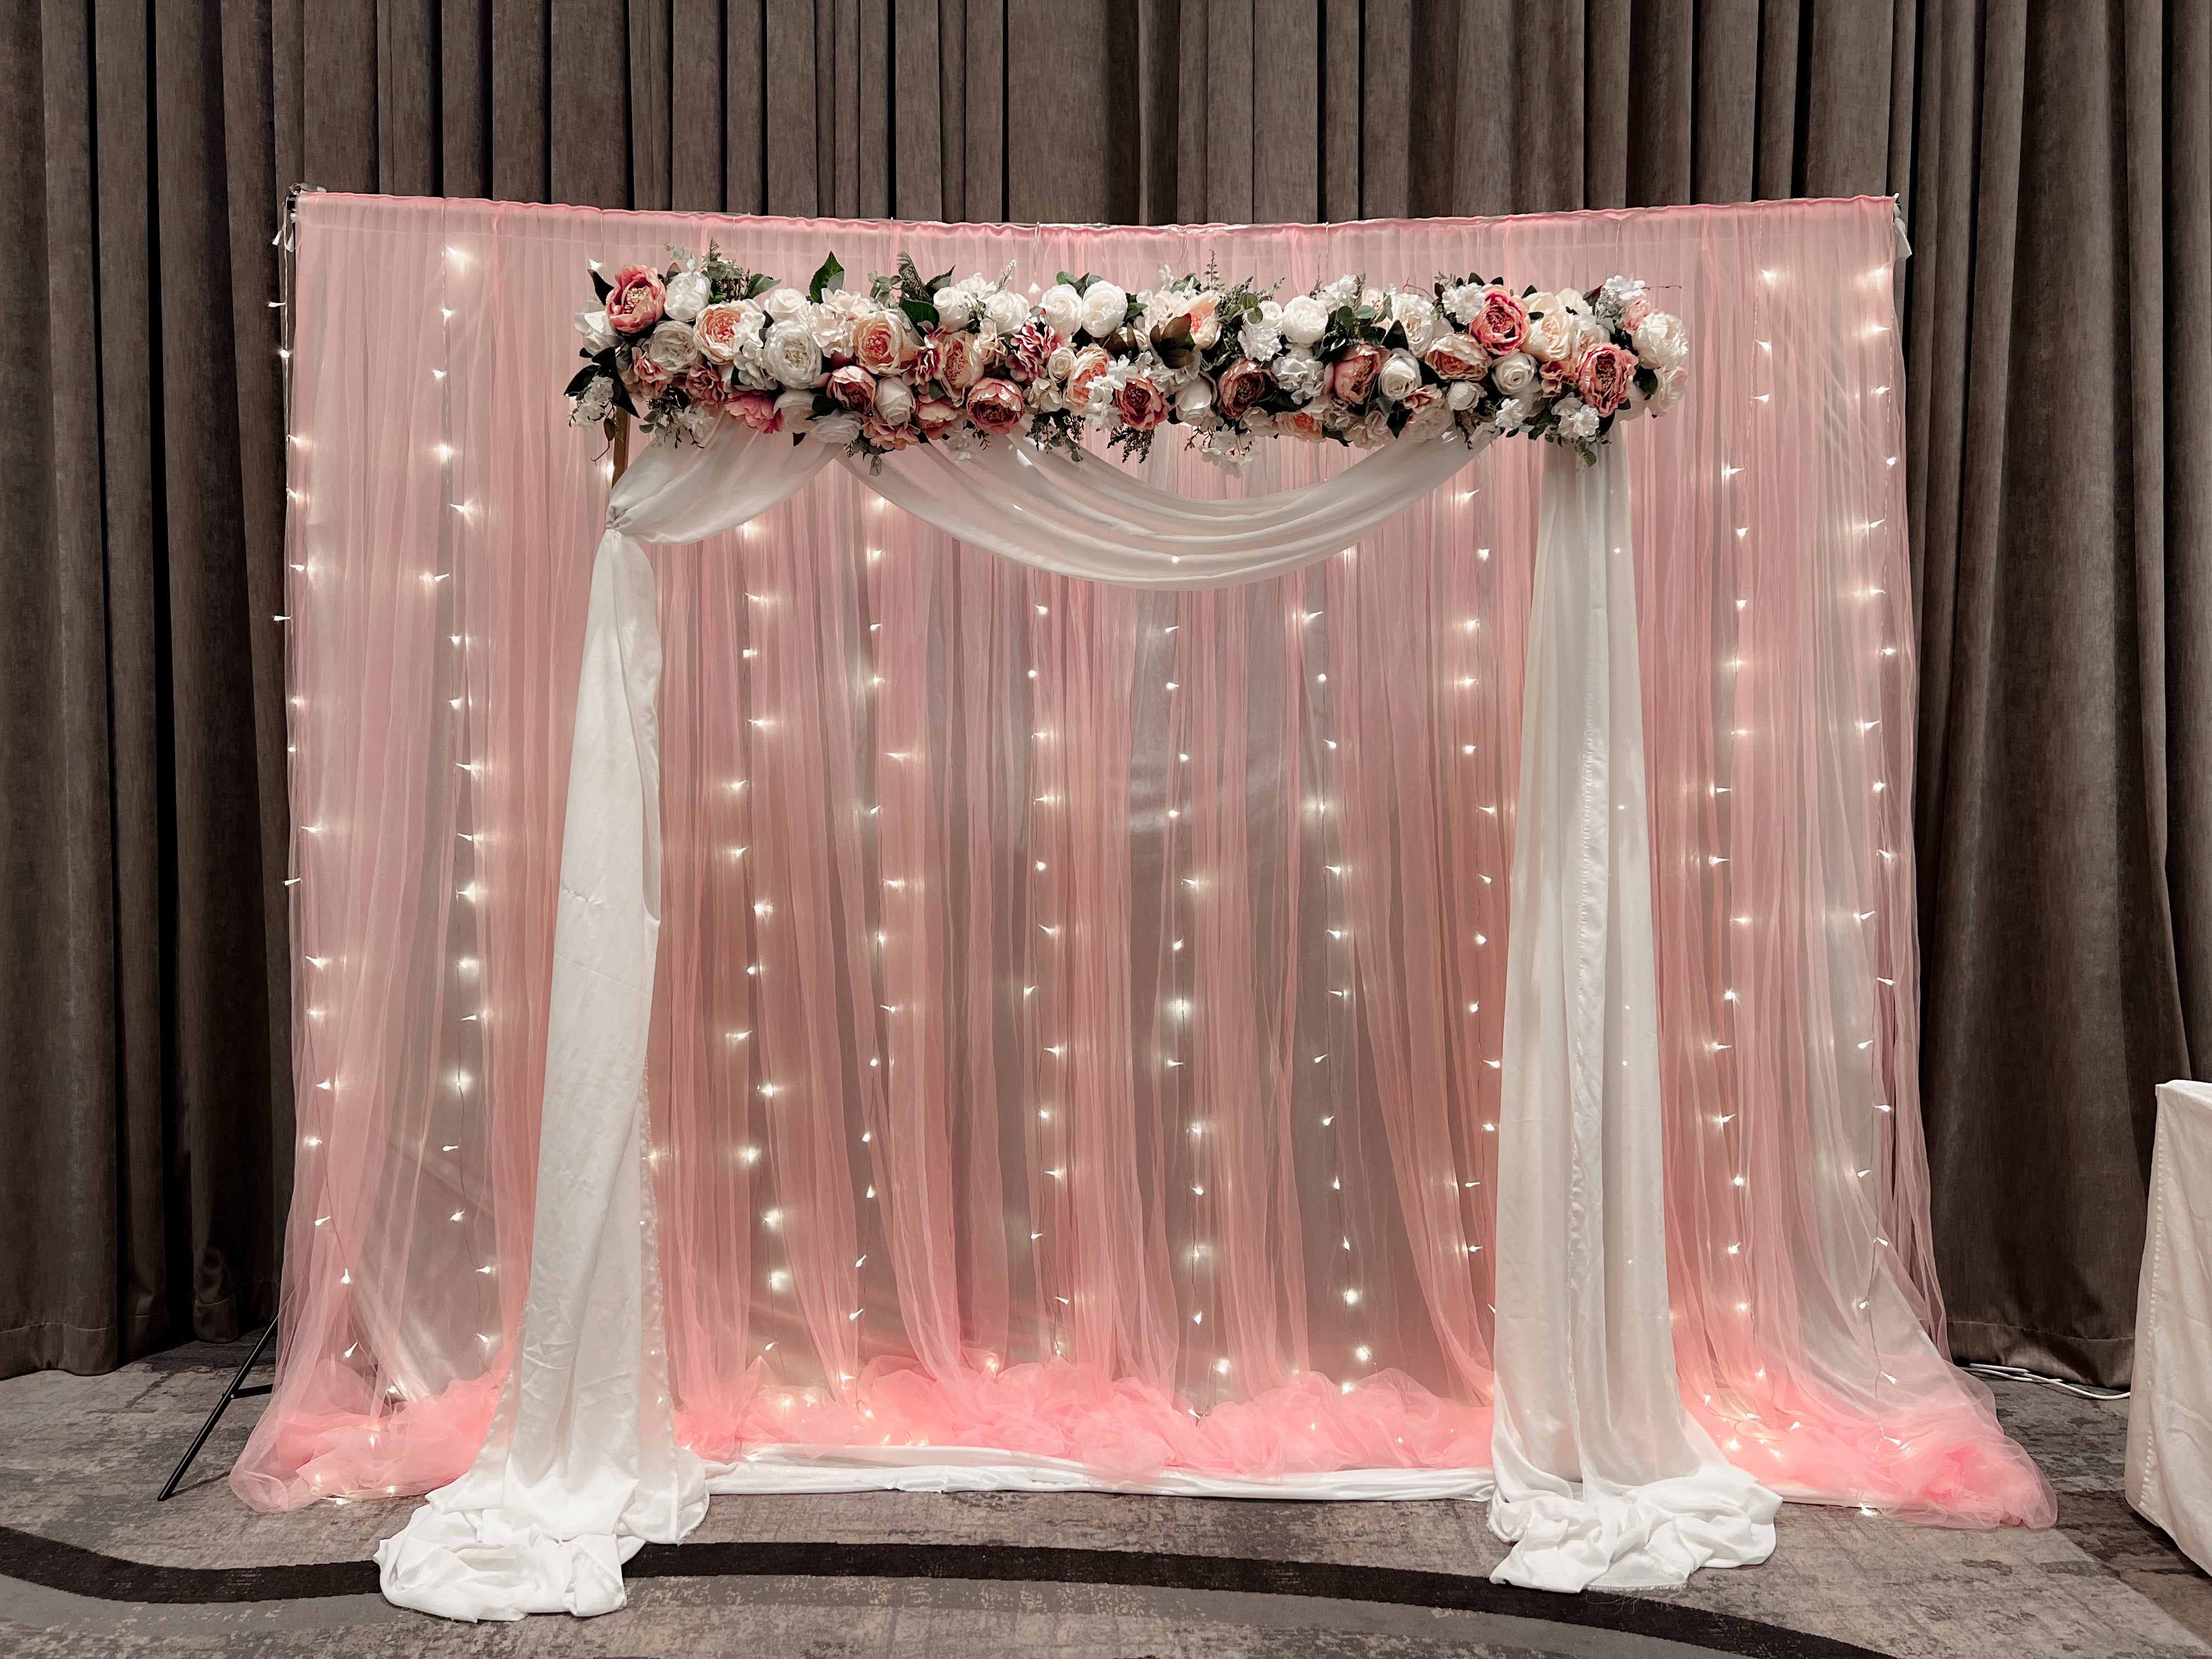 Affordable Wedding/ Solemnisation Decor in Singapore -Pink White Peach Floral Arch with Fairy-lights Backdrop (Venue: Hilton Singapore Orchard)